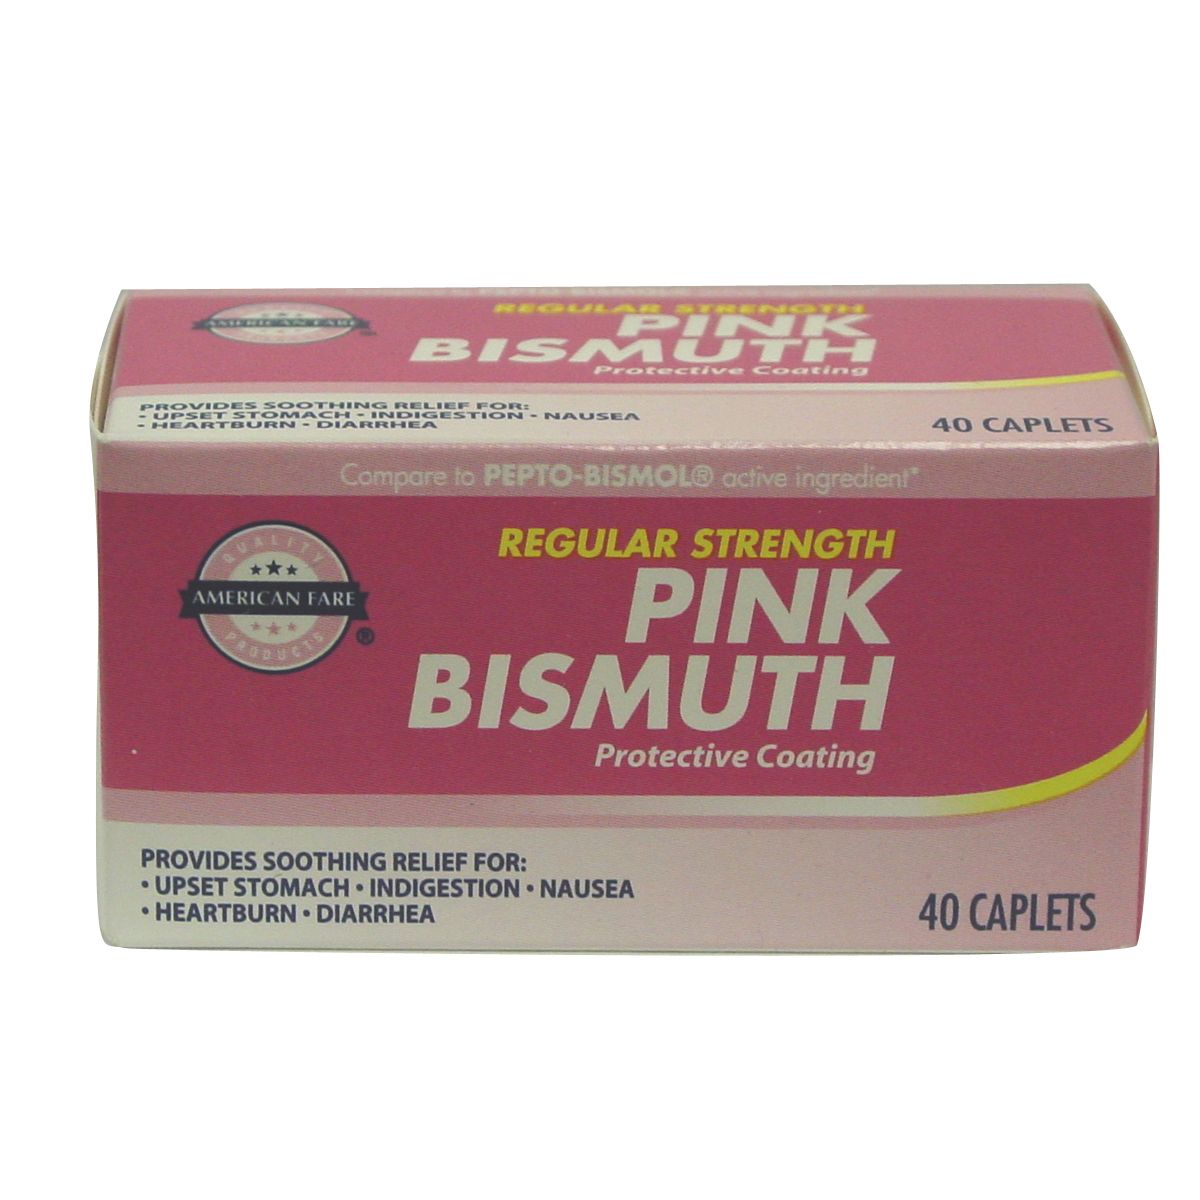 American Fare Regular Strength Pink Bismuth Protective Coating Caplets 40 Count